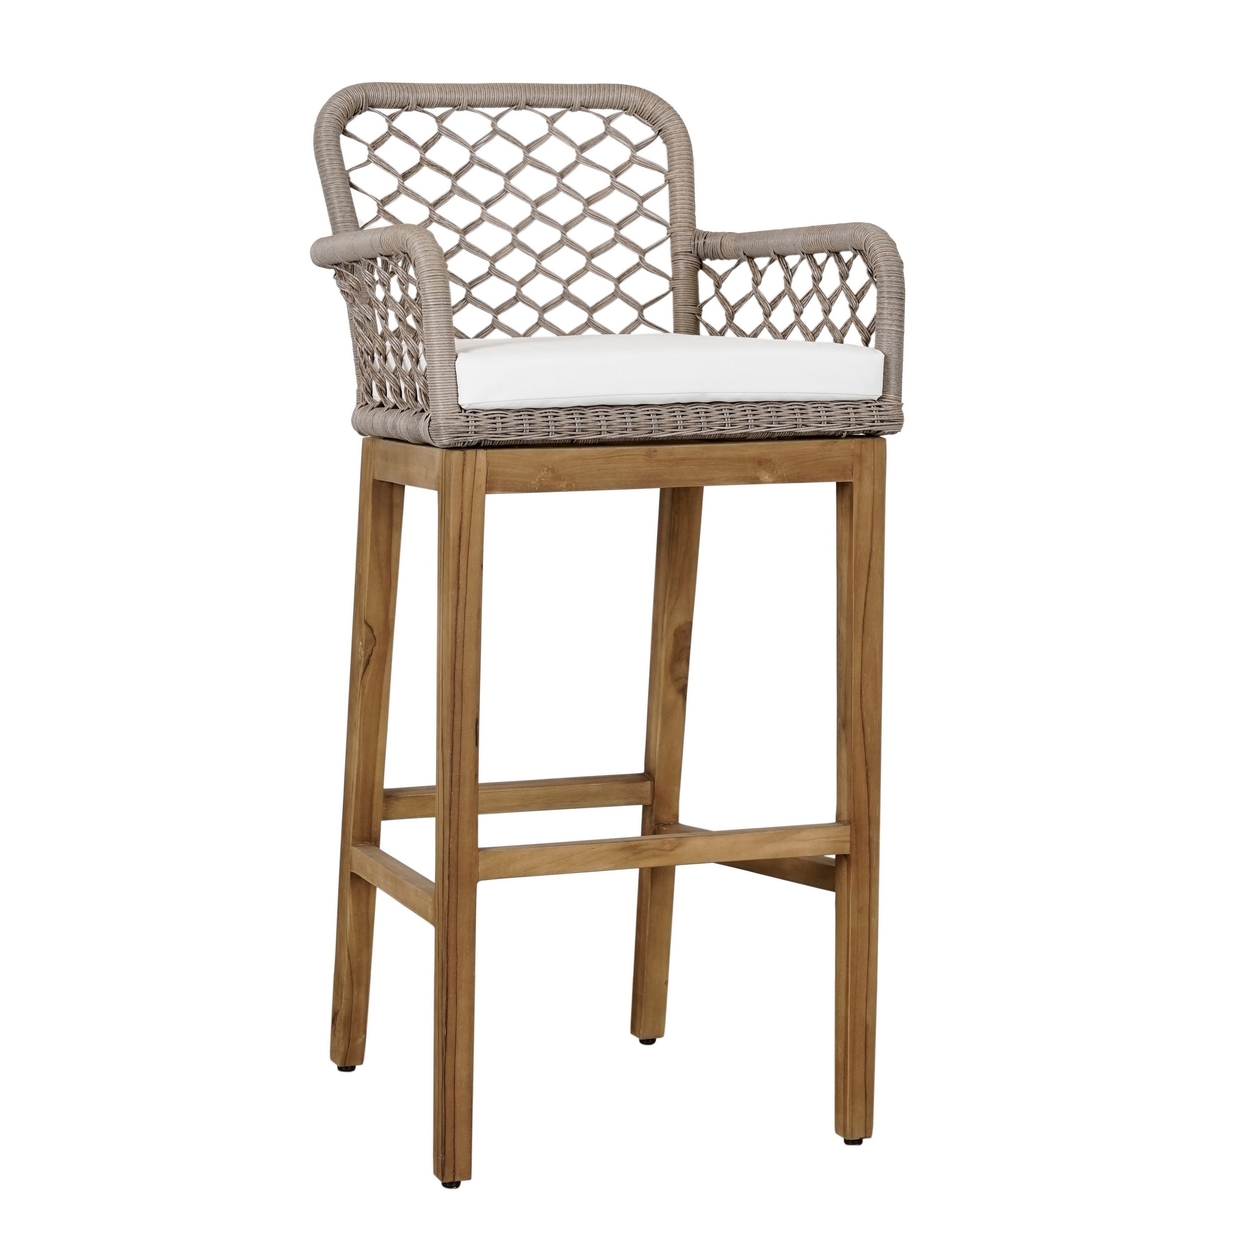 Aok 33 Inch Outdoor Barstool Chair, Gray Woven Rope, Curved Back, Brown Teak -Saltoro Sherpi